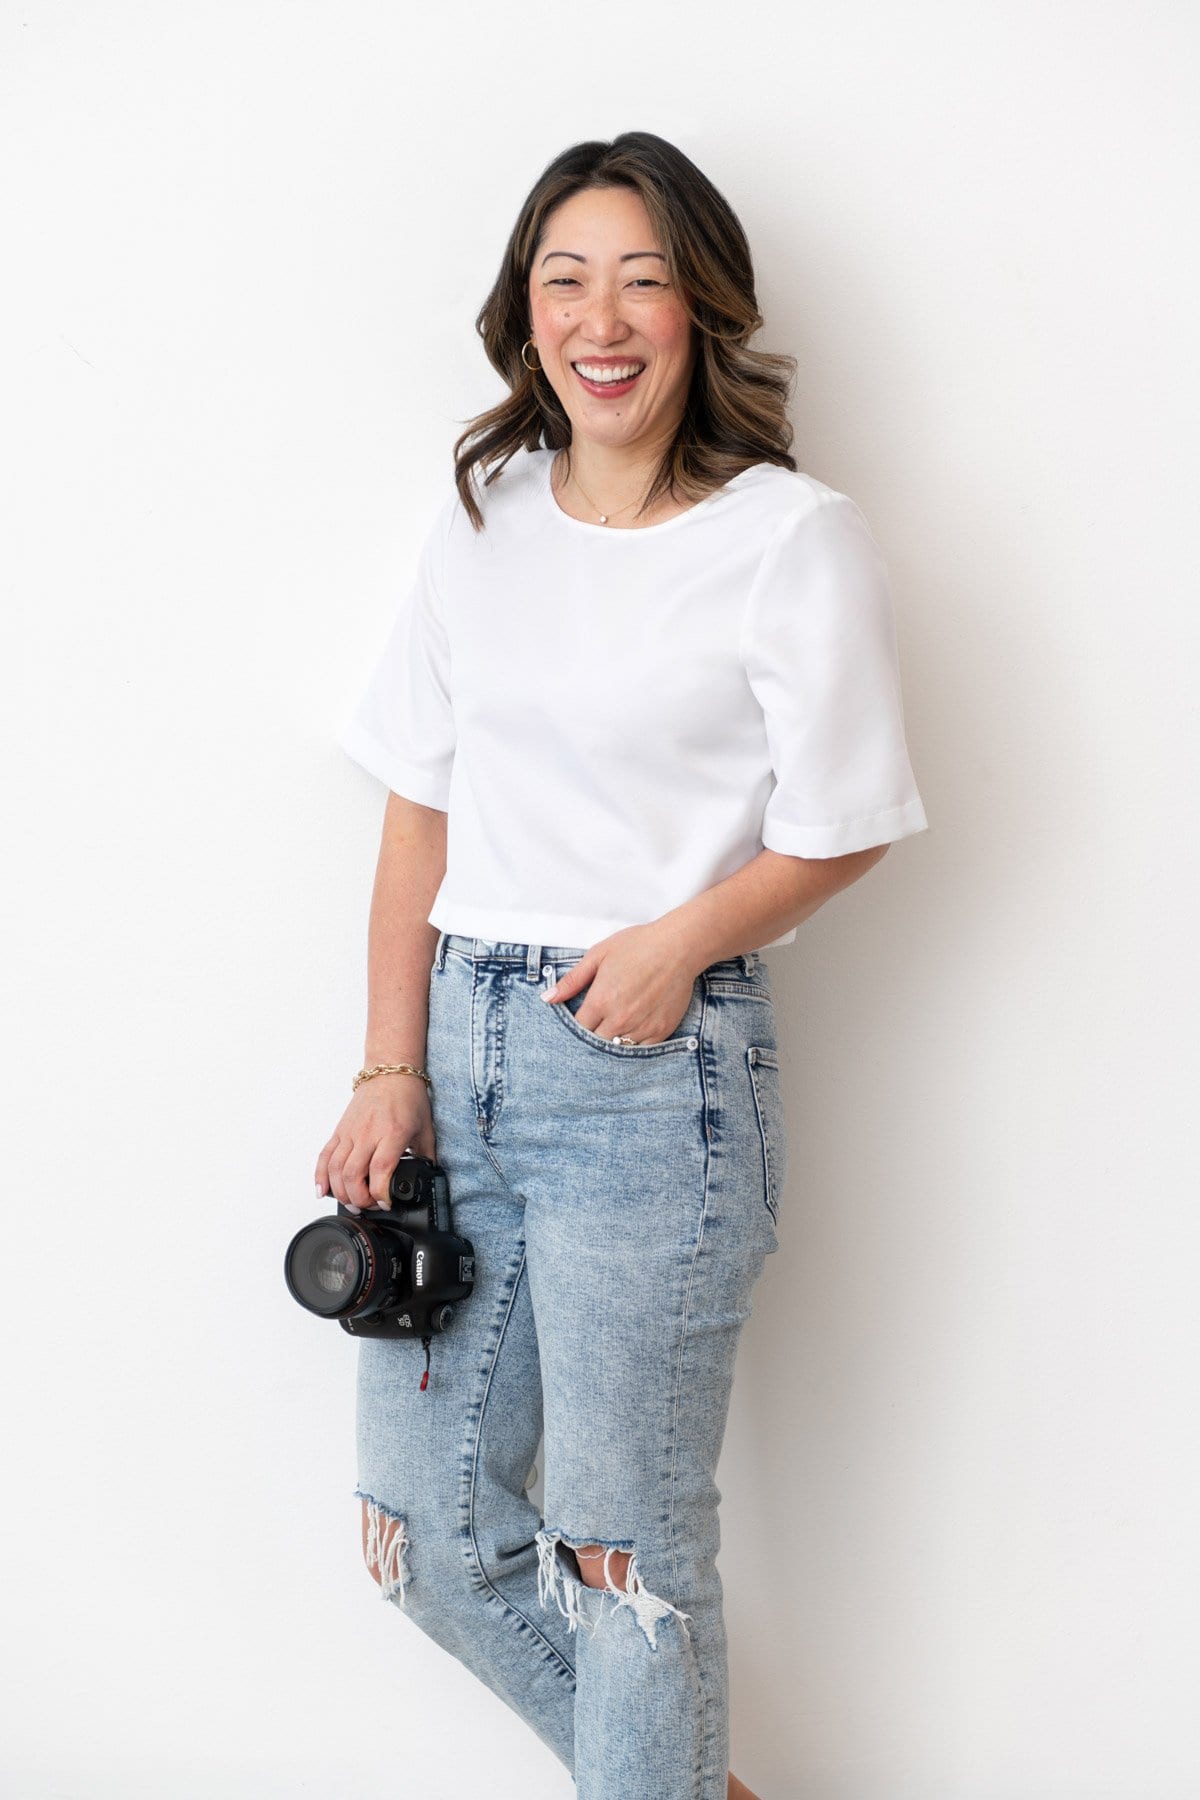 Julie Chiou in a white shirt and light blue jeans holding a camera and smiling against a wall